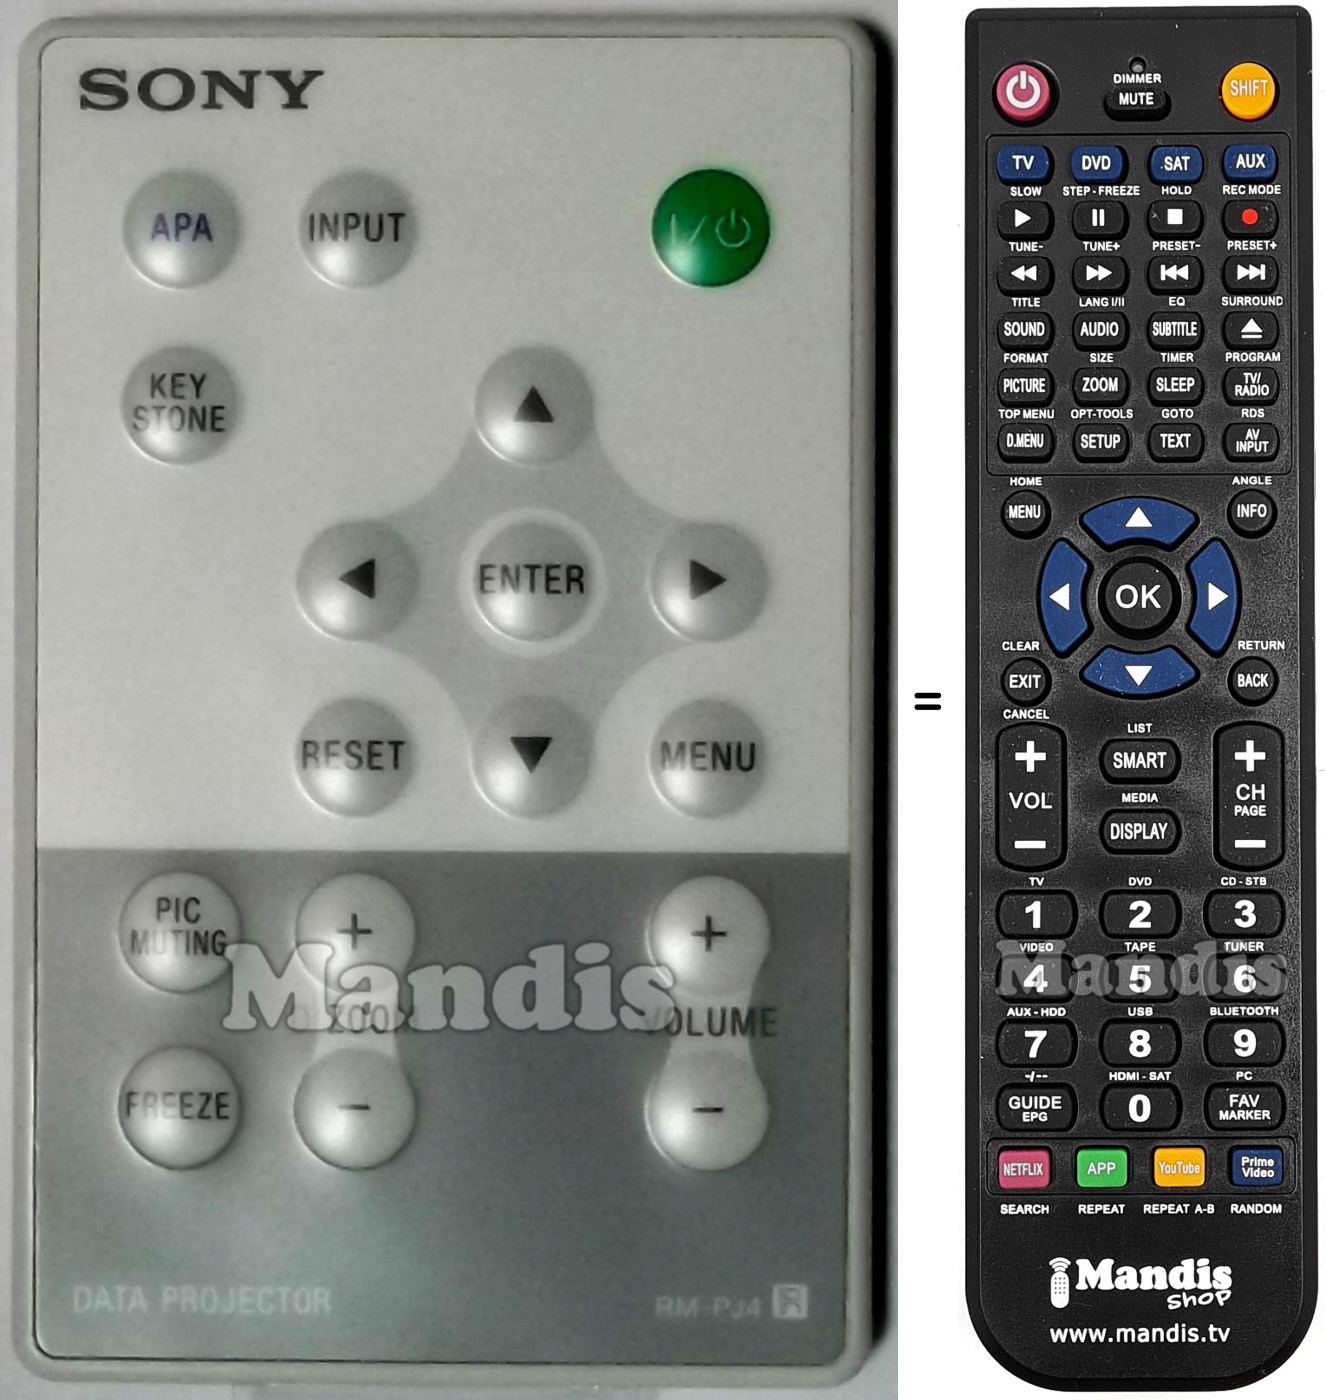 Replacement remote control Sony RM-PJ4